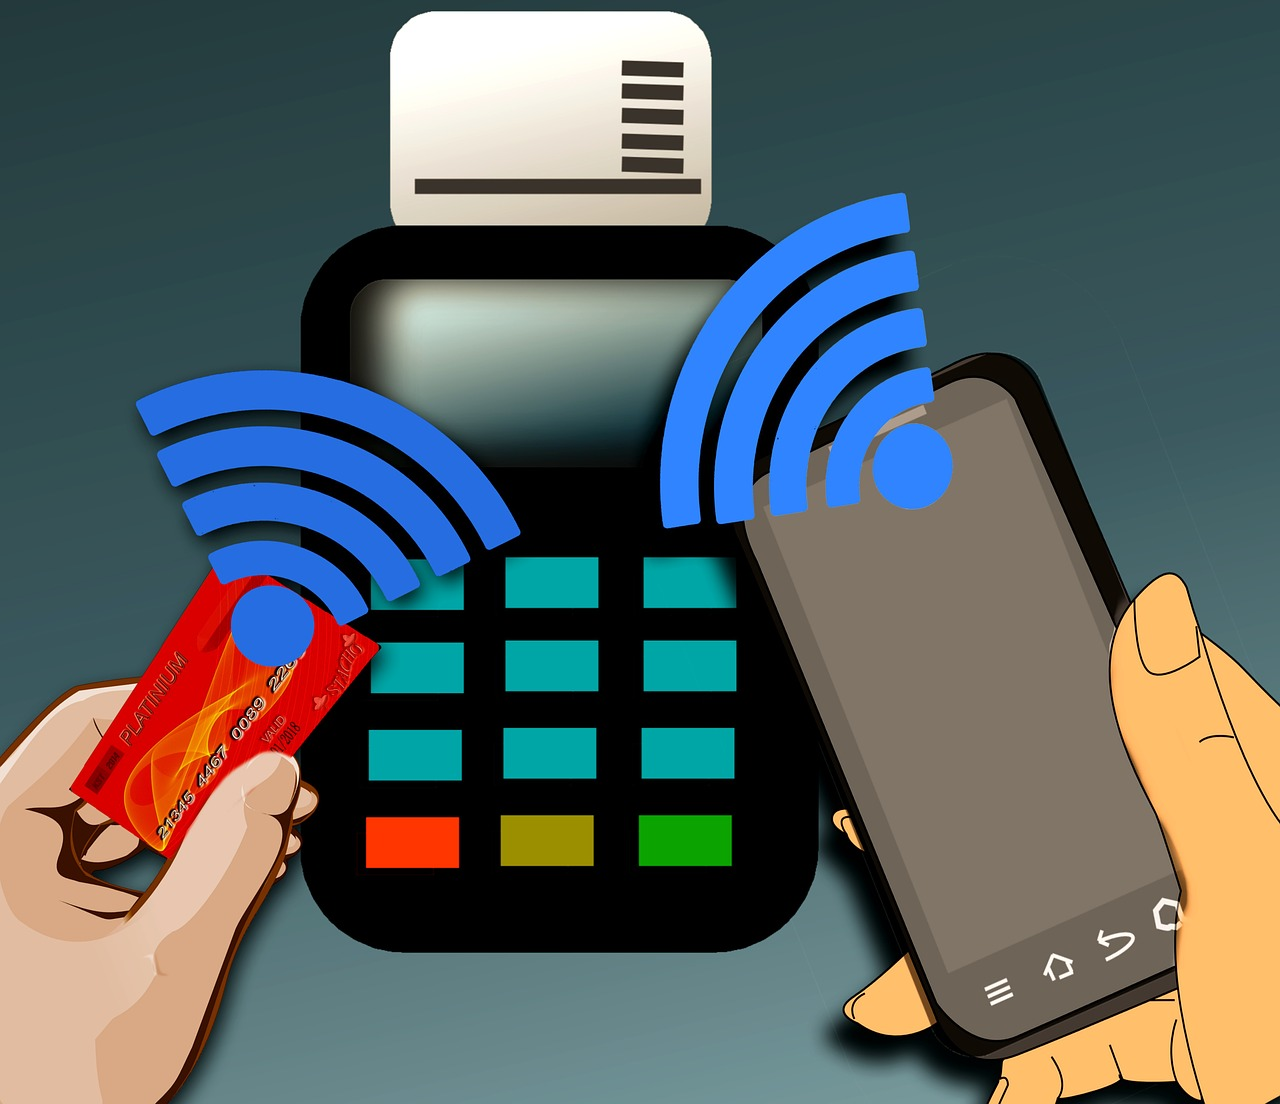 NFC Payments